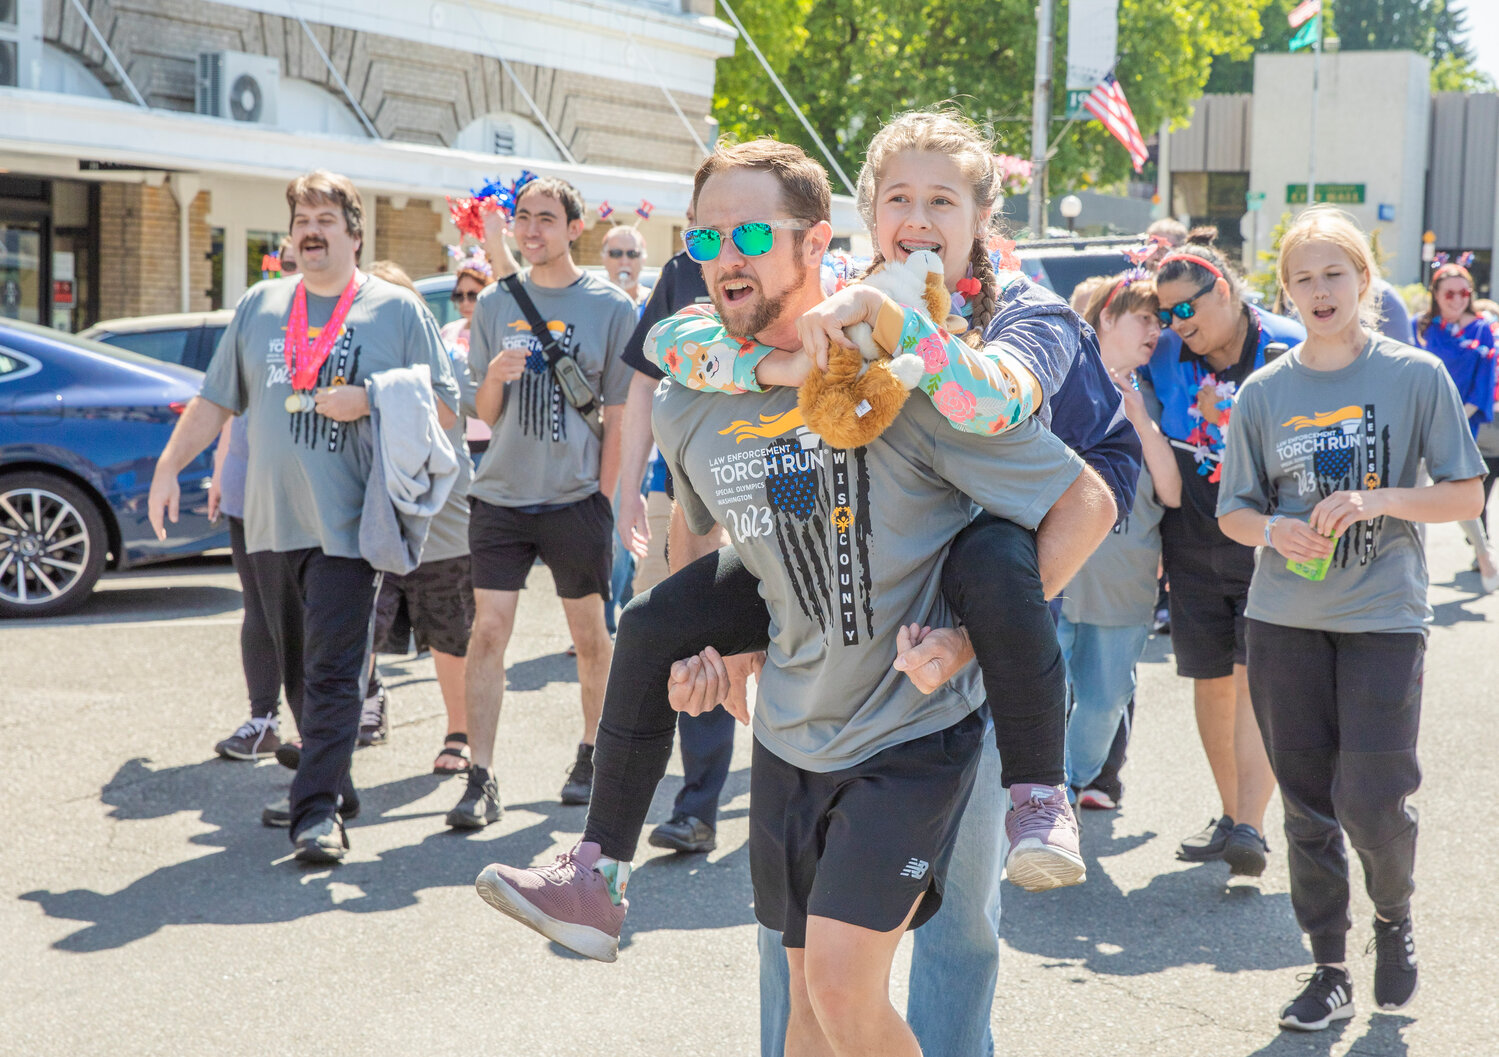 Participants lift each other up and cheer during the Lewis County Special Olympics Law Enforcement Torch Run in downtown Chehalis on Friday, June 2.